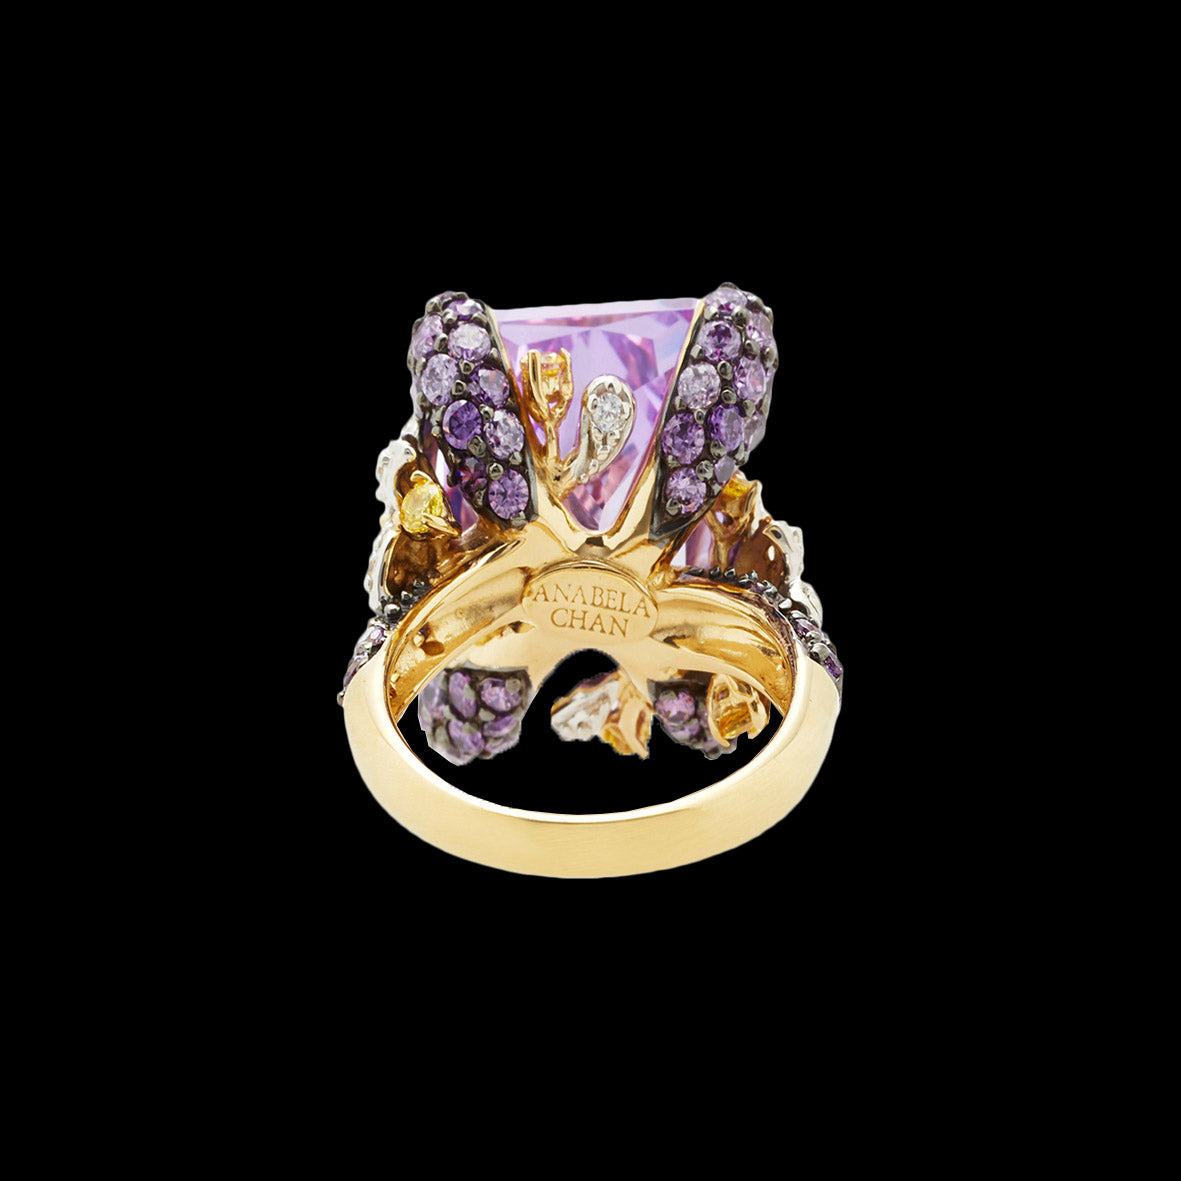 Lilac Cinderella Ring, Ring, Anabela Chan Joaillerie - Fine jewelry with laboratory grown and created gemstones hand-crafted in the United Kingdom. Anabela Chan Joaillerie is the first fine jewellery brand in the world to champion laboratory-grown and created gemstones with high jewellery design, artisanal craftsmanship and a focus on ethical and sustainable innovations.